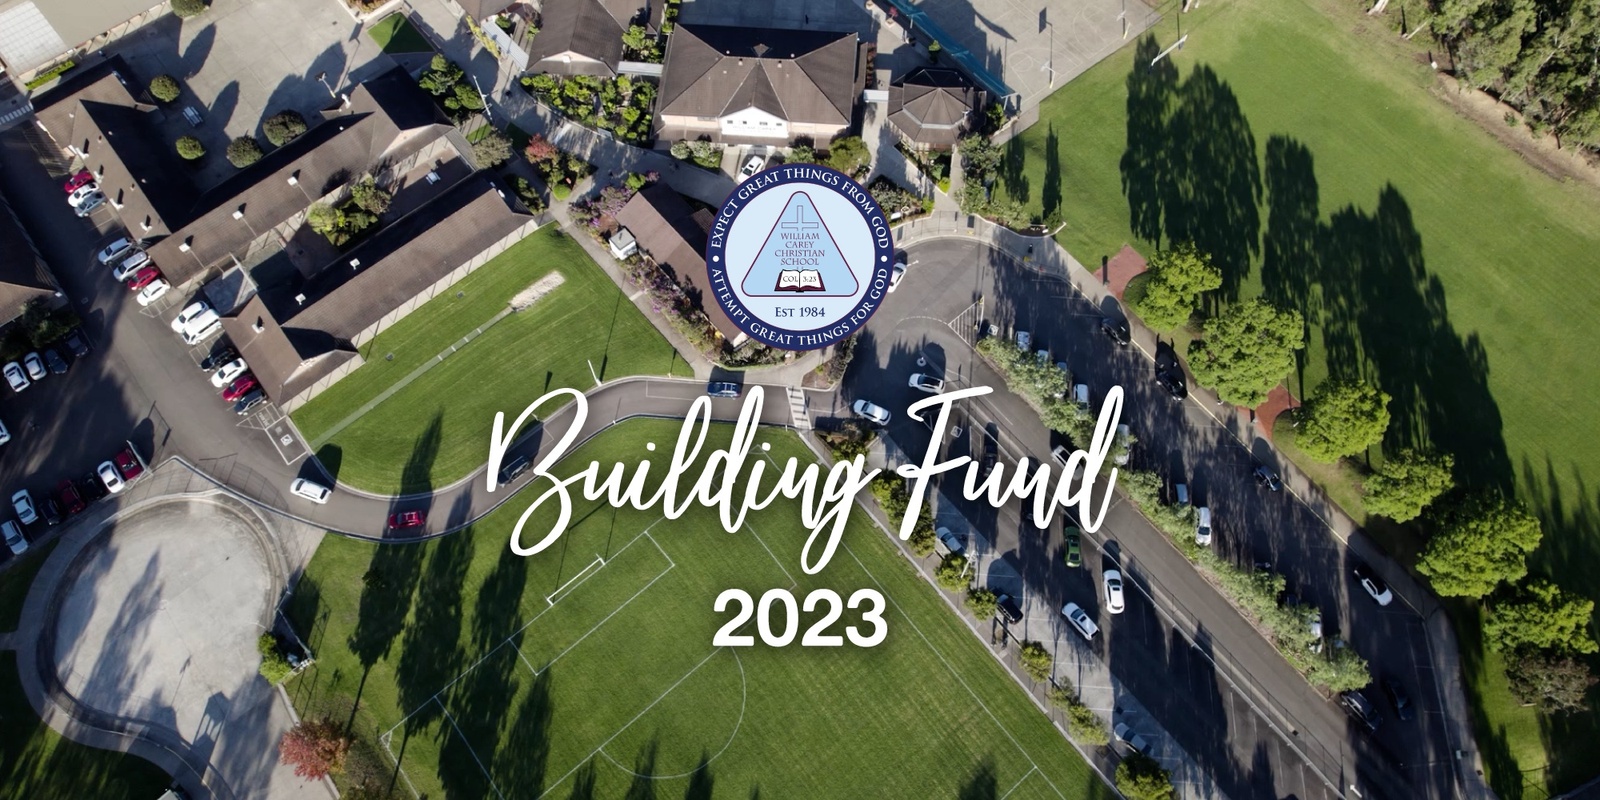 WCCS Building Fund 2023